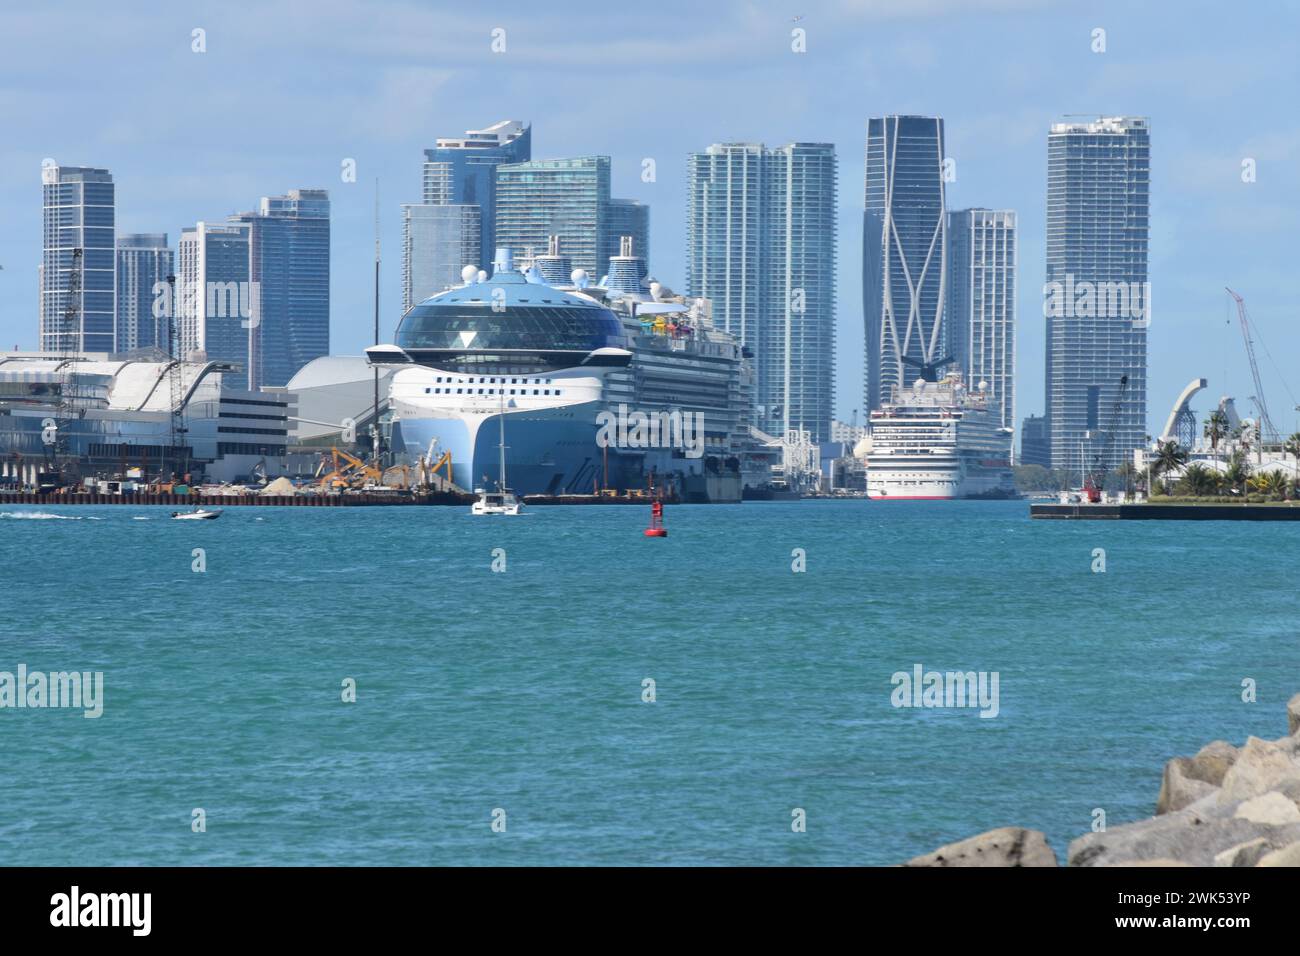 The world's largest cruise ship, Icon of the Seas, docked at PortMiami, against a backdrop of the skyscrapers of Brickell & Downtown Miami, Feb. 2024. Stock Photo